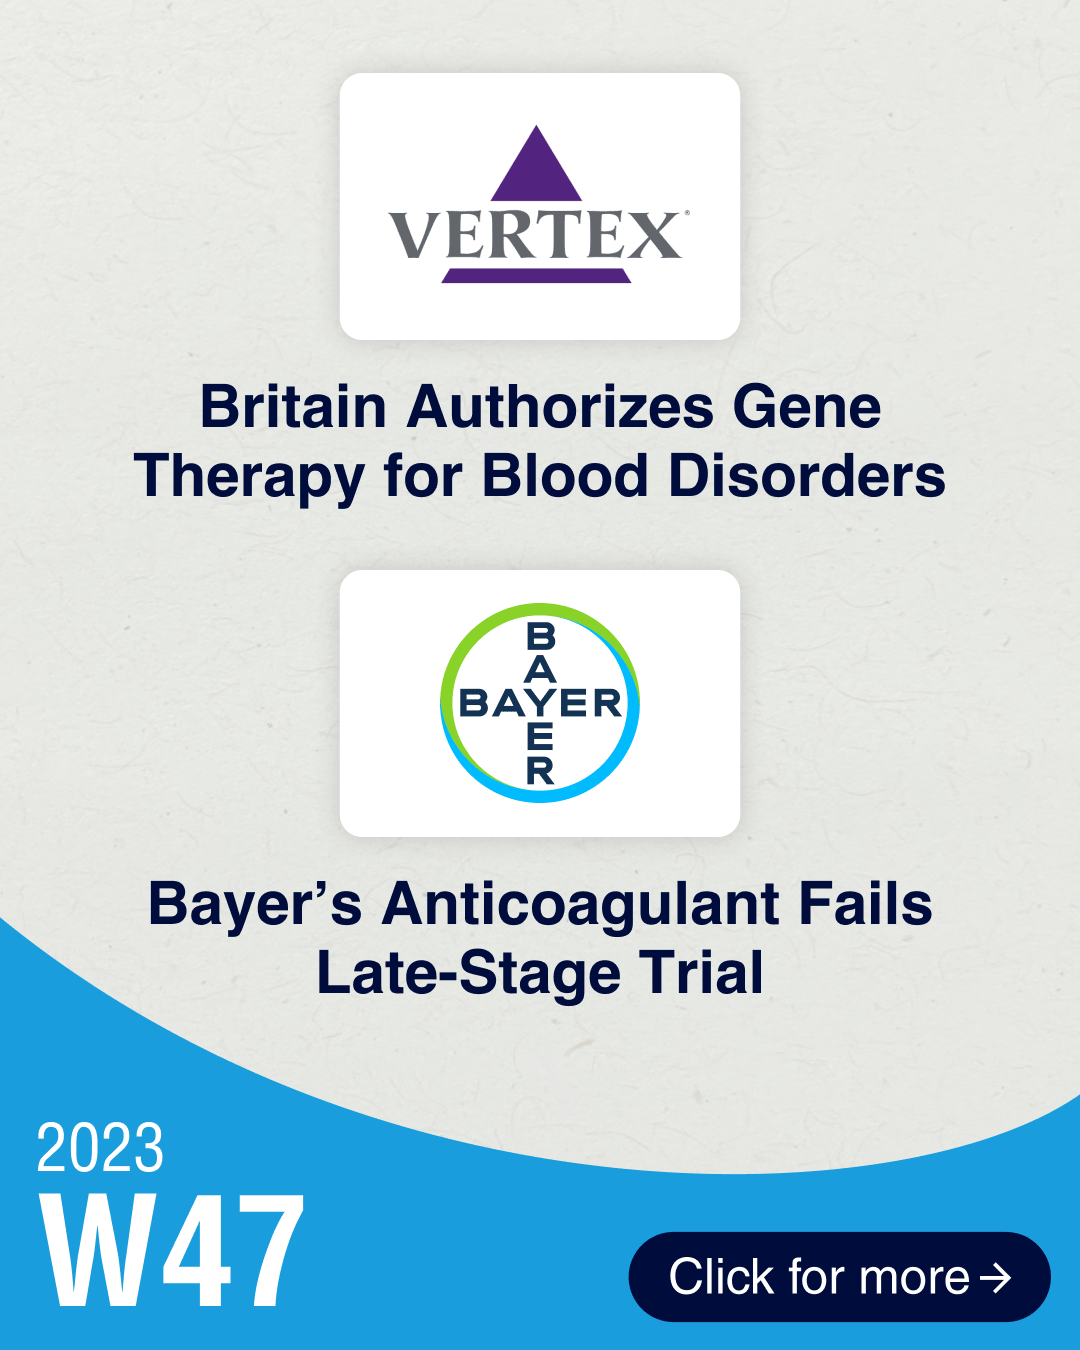 Britain authorizes gene therapy for blood disorders; Bayer’s anticoagulant fails late-stage trial